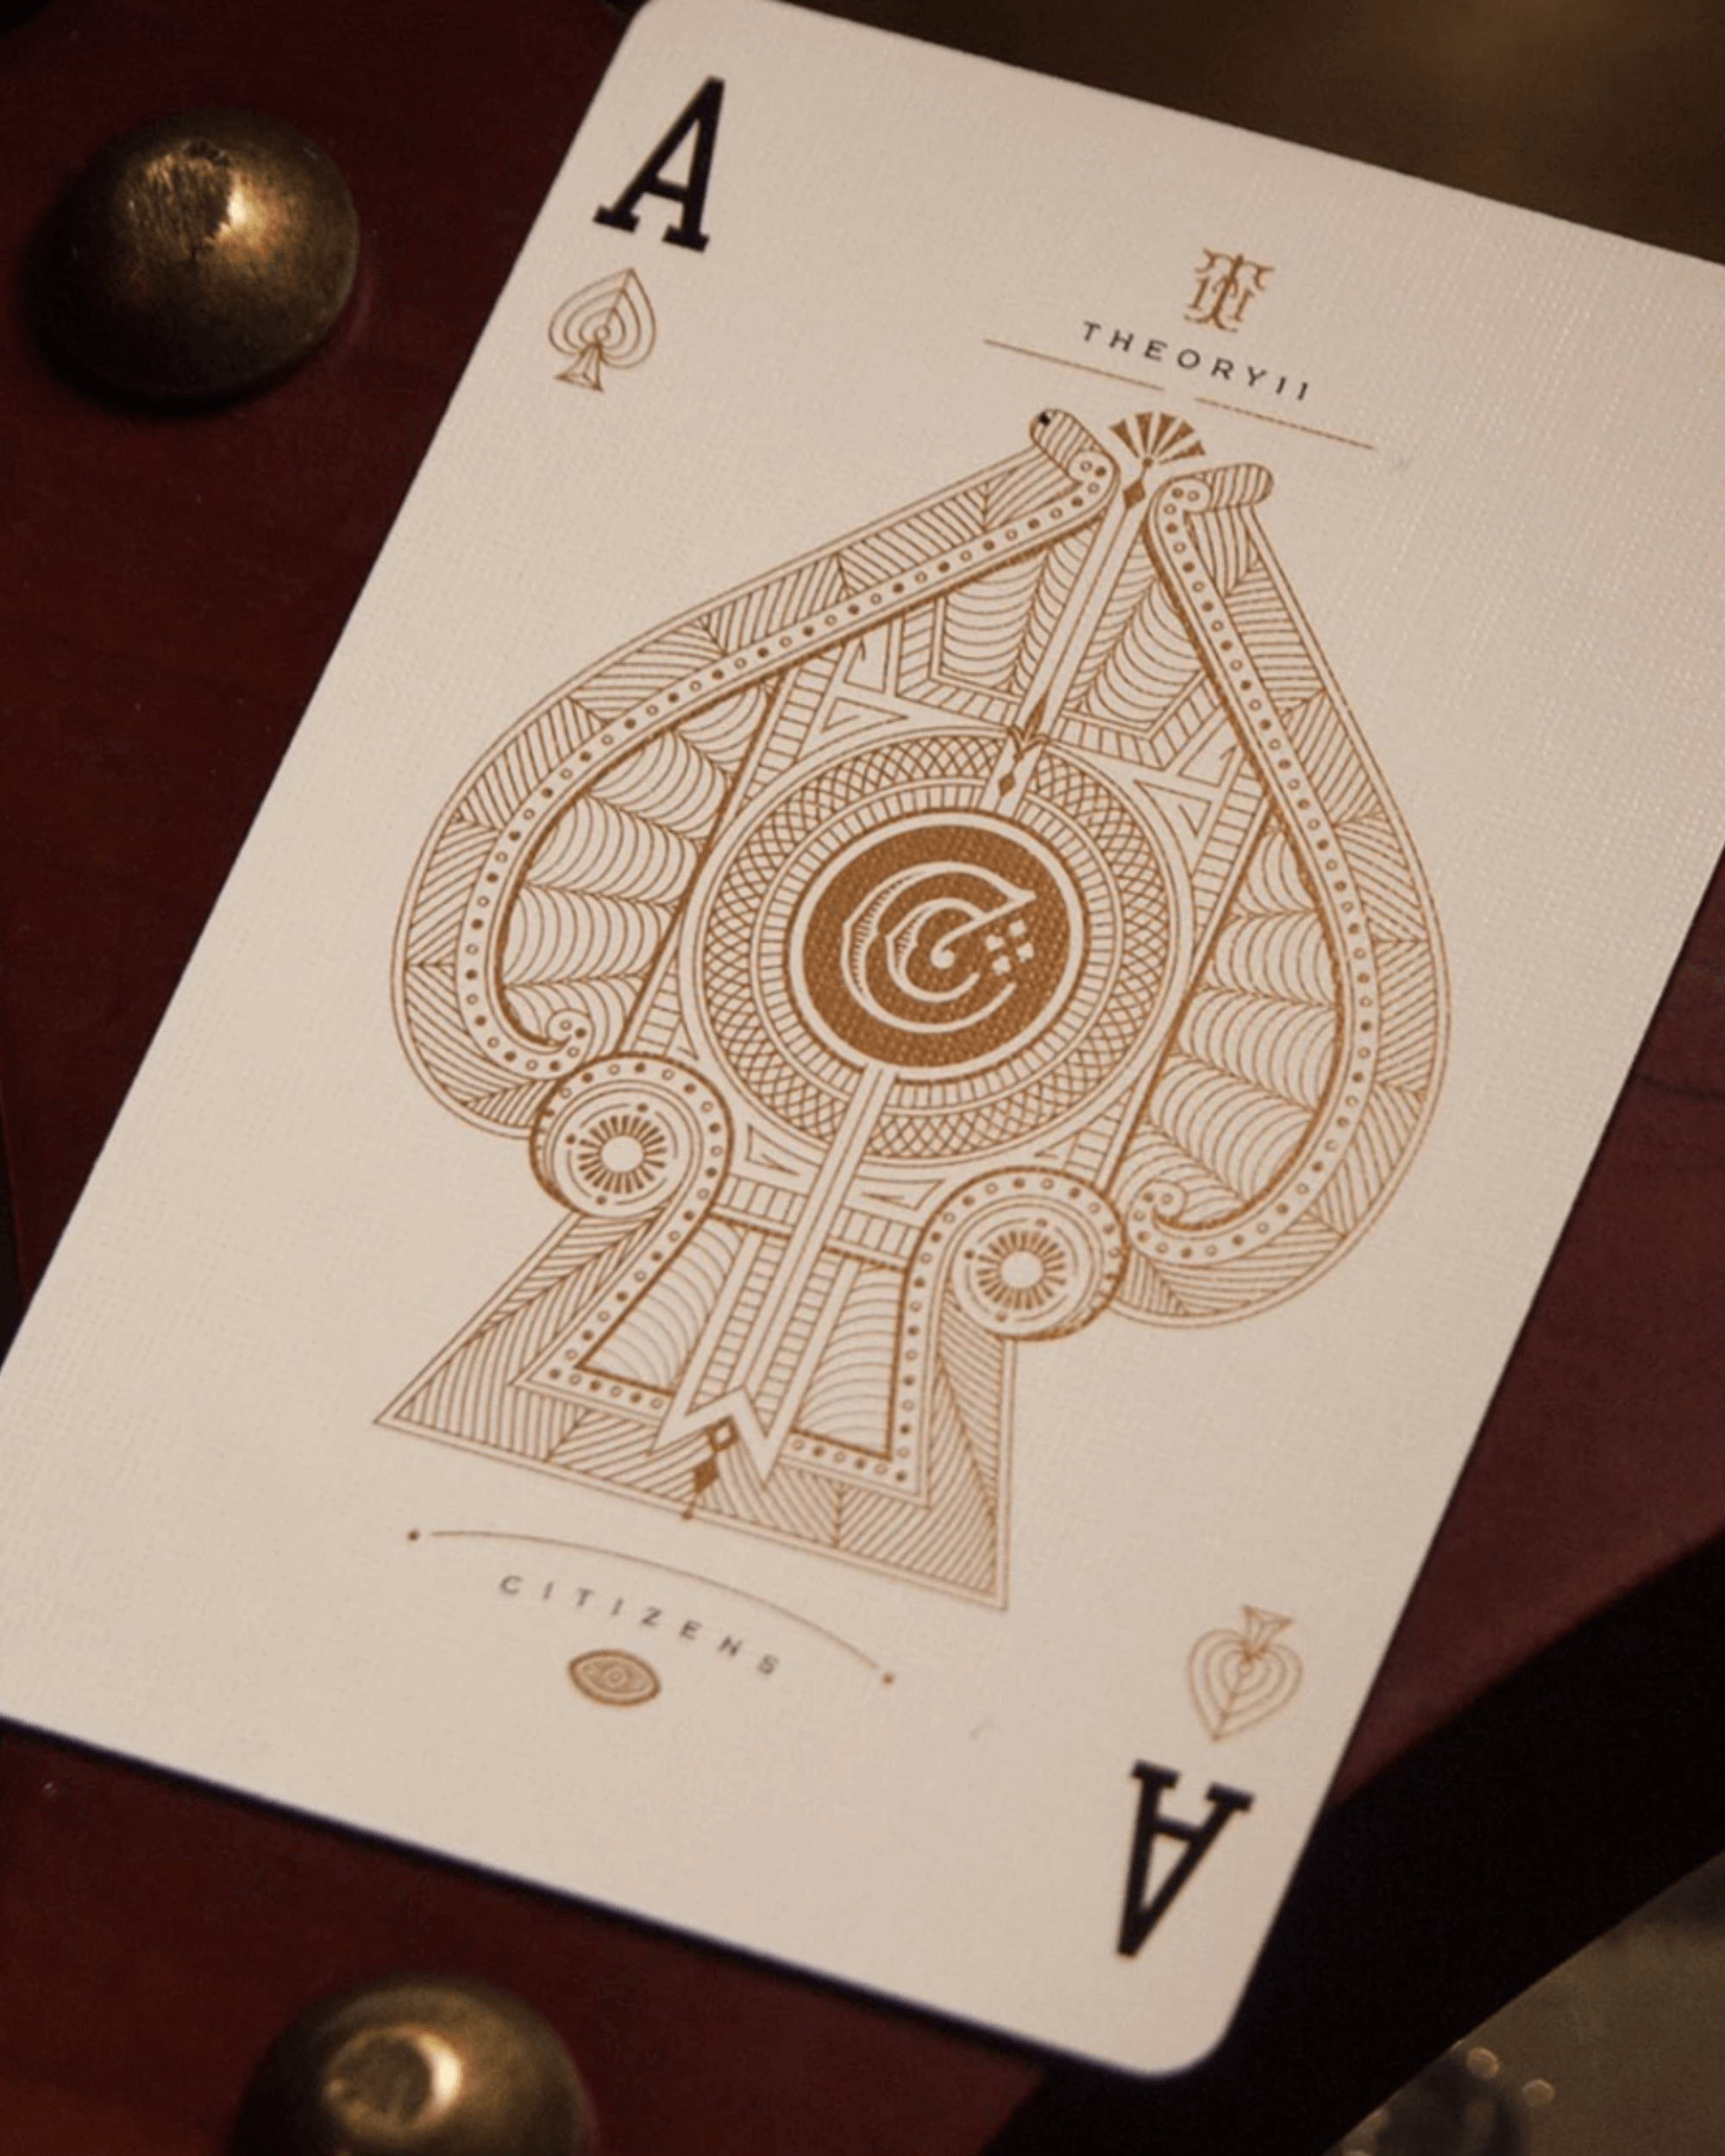 theory11 : citizens playing cards